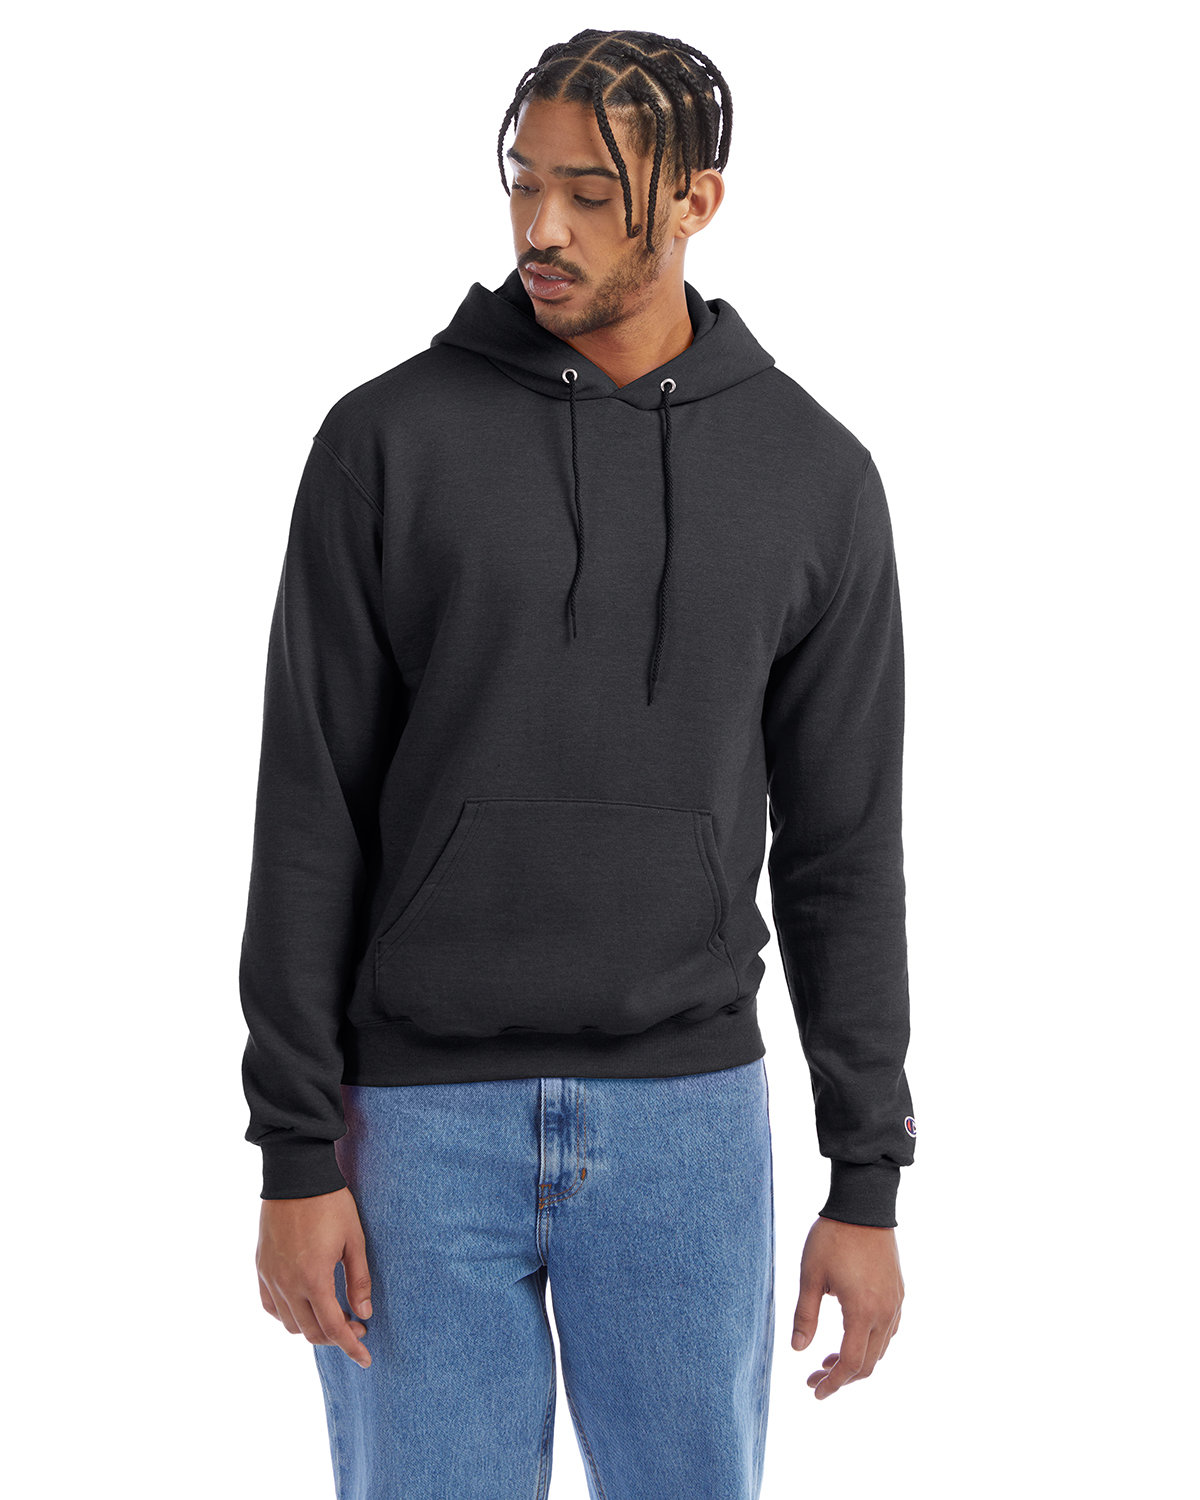 Champion Adult Powerblend® Pullover Hooded Sweatshirt CHARCOAL HEATHER 